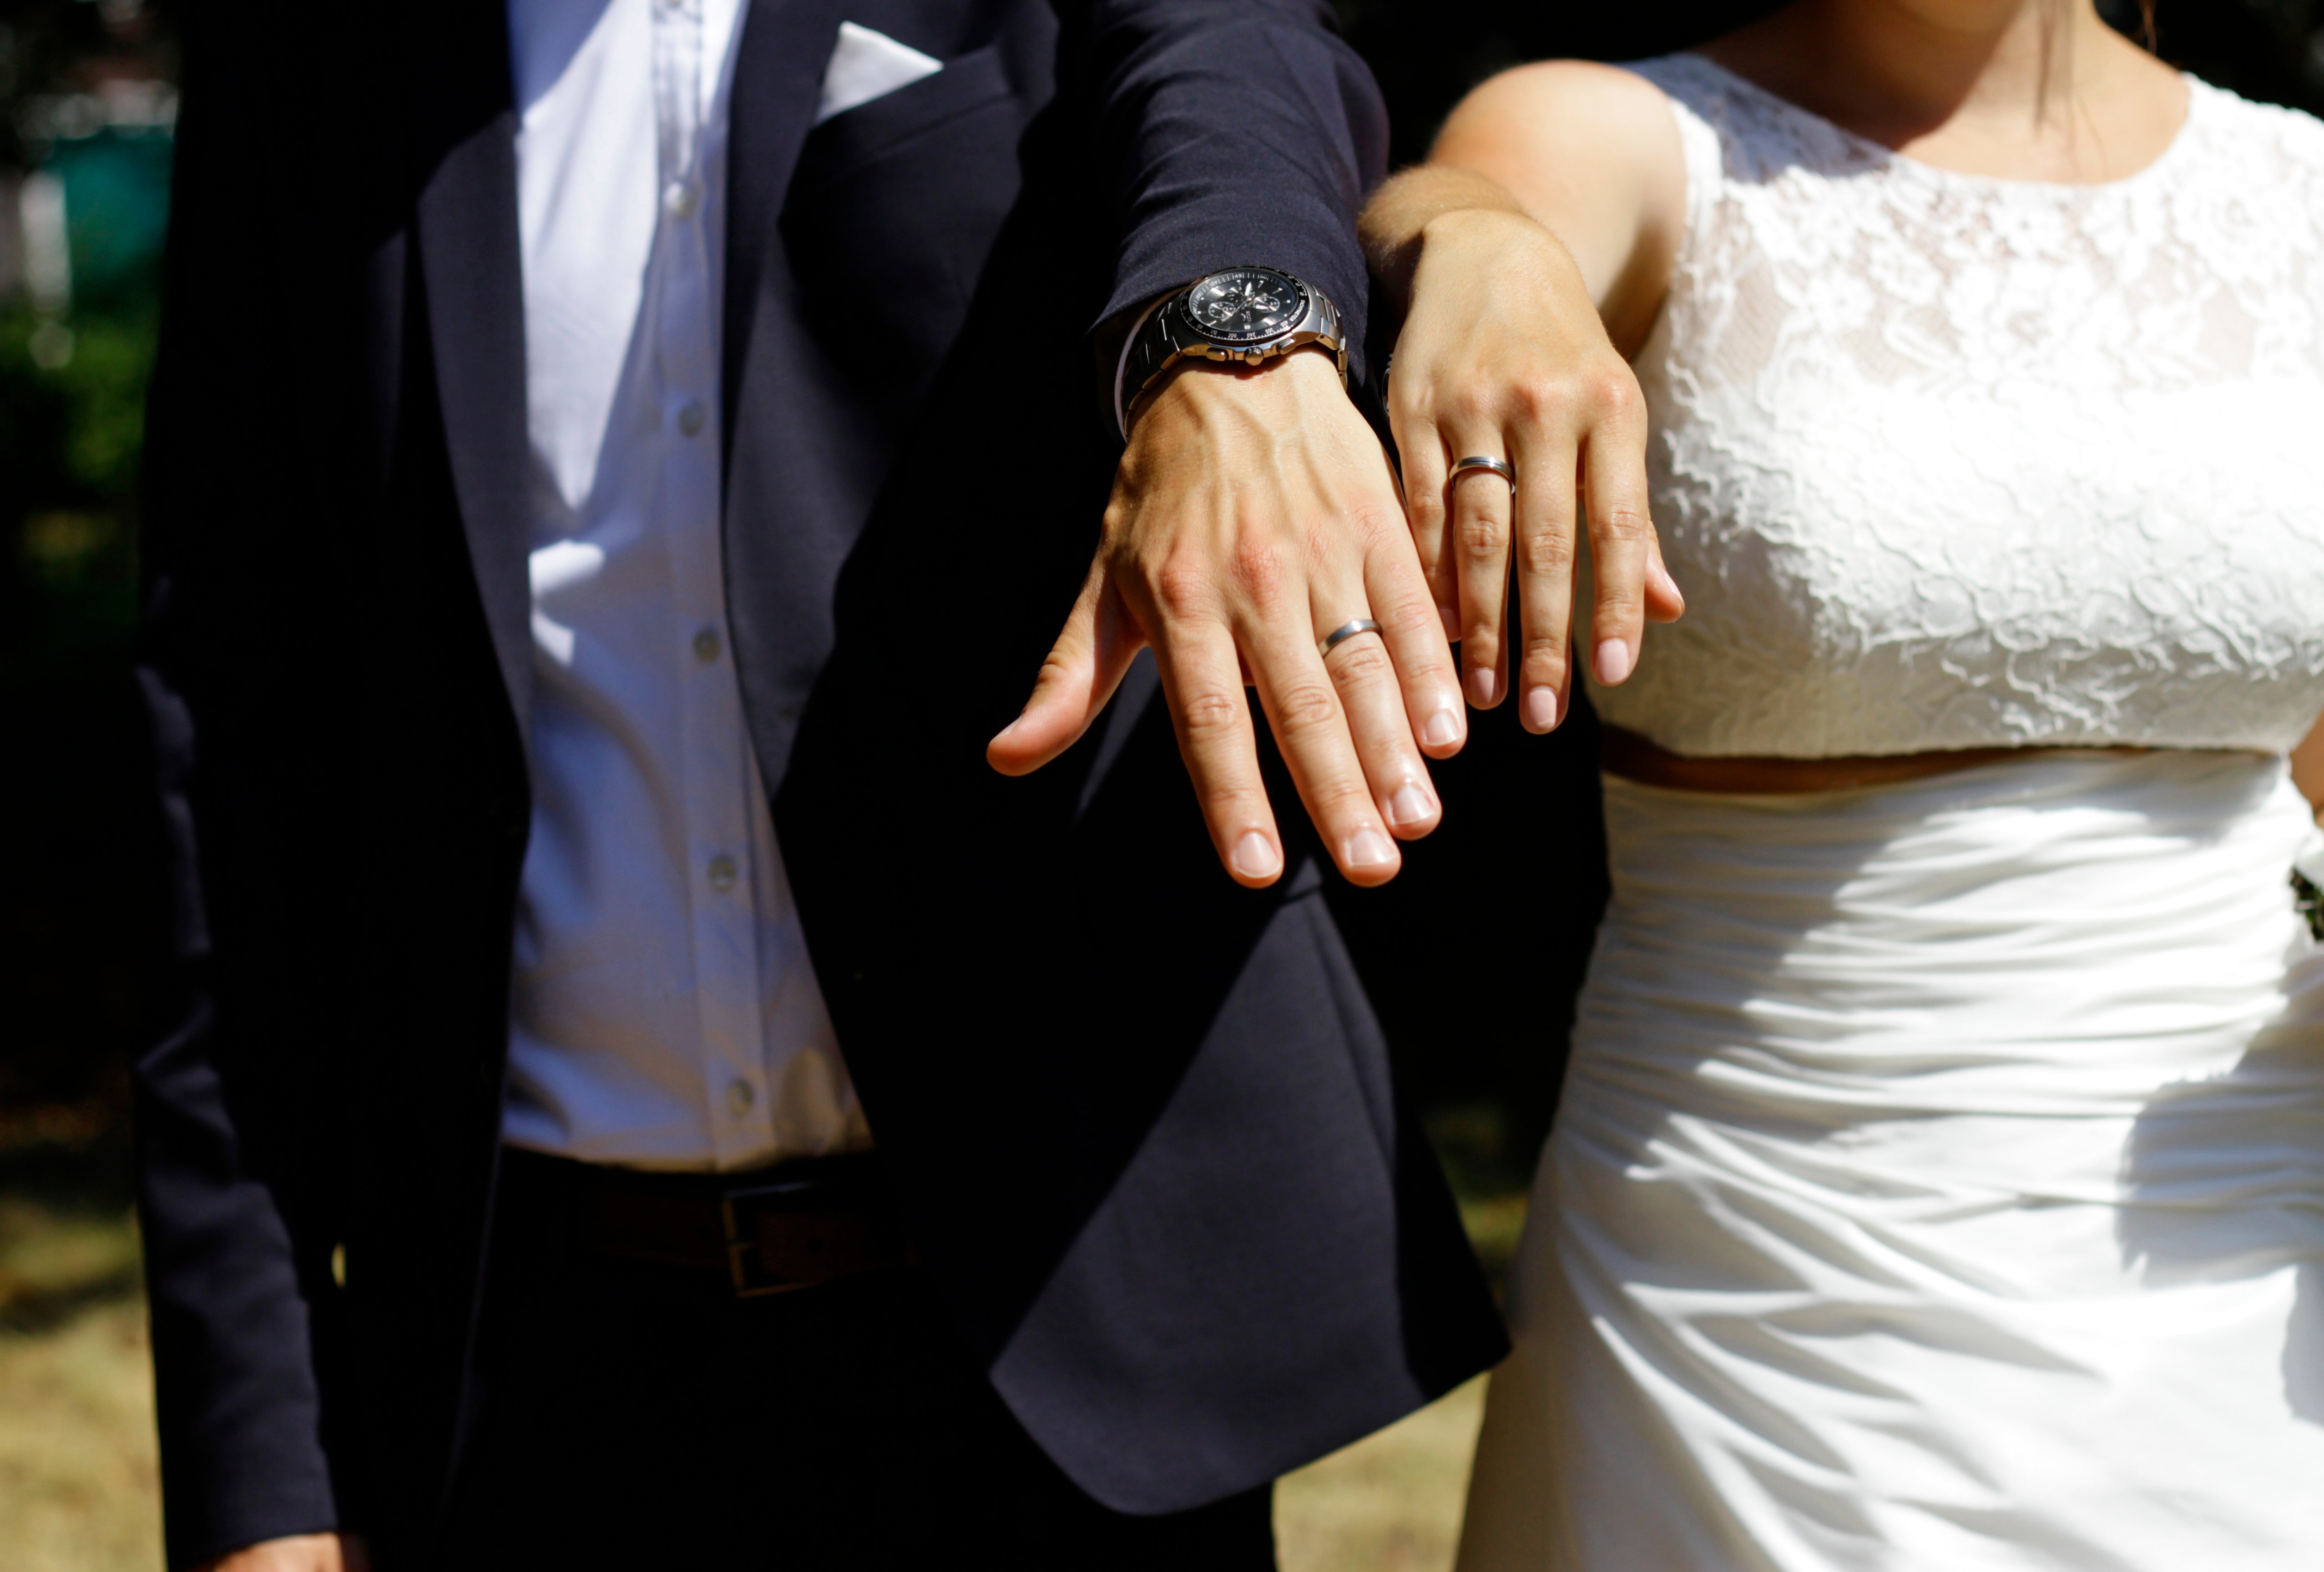 man in black suit and woman in white wedding dress showing their wedding rings